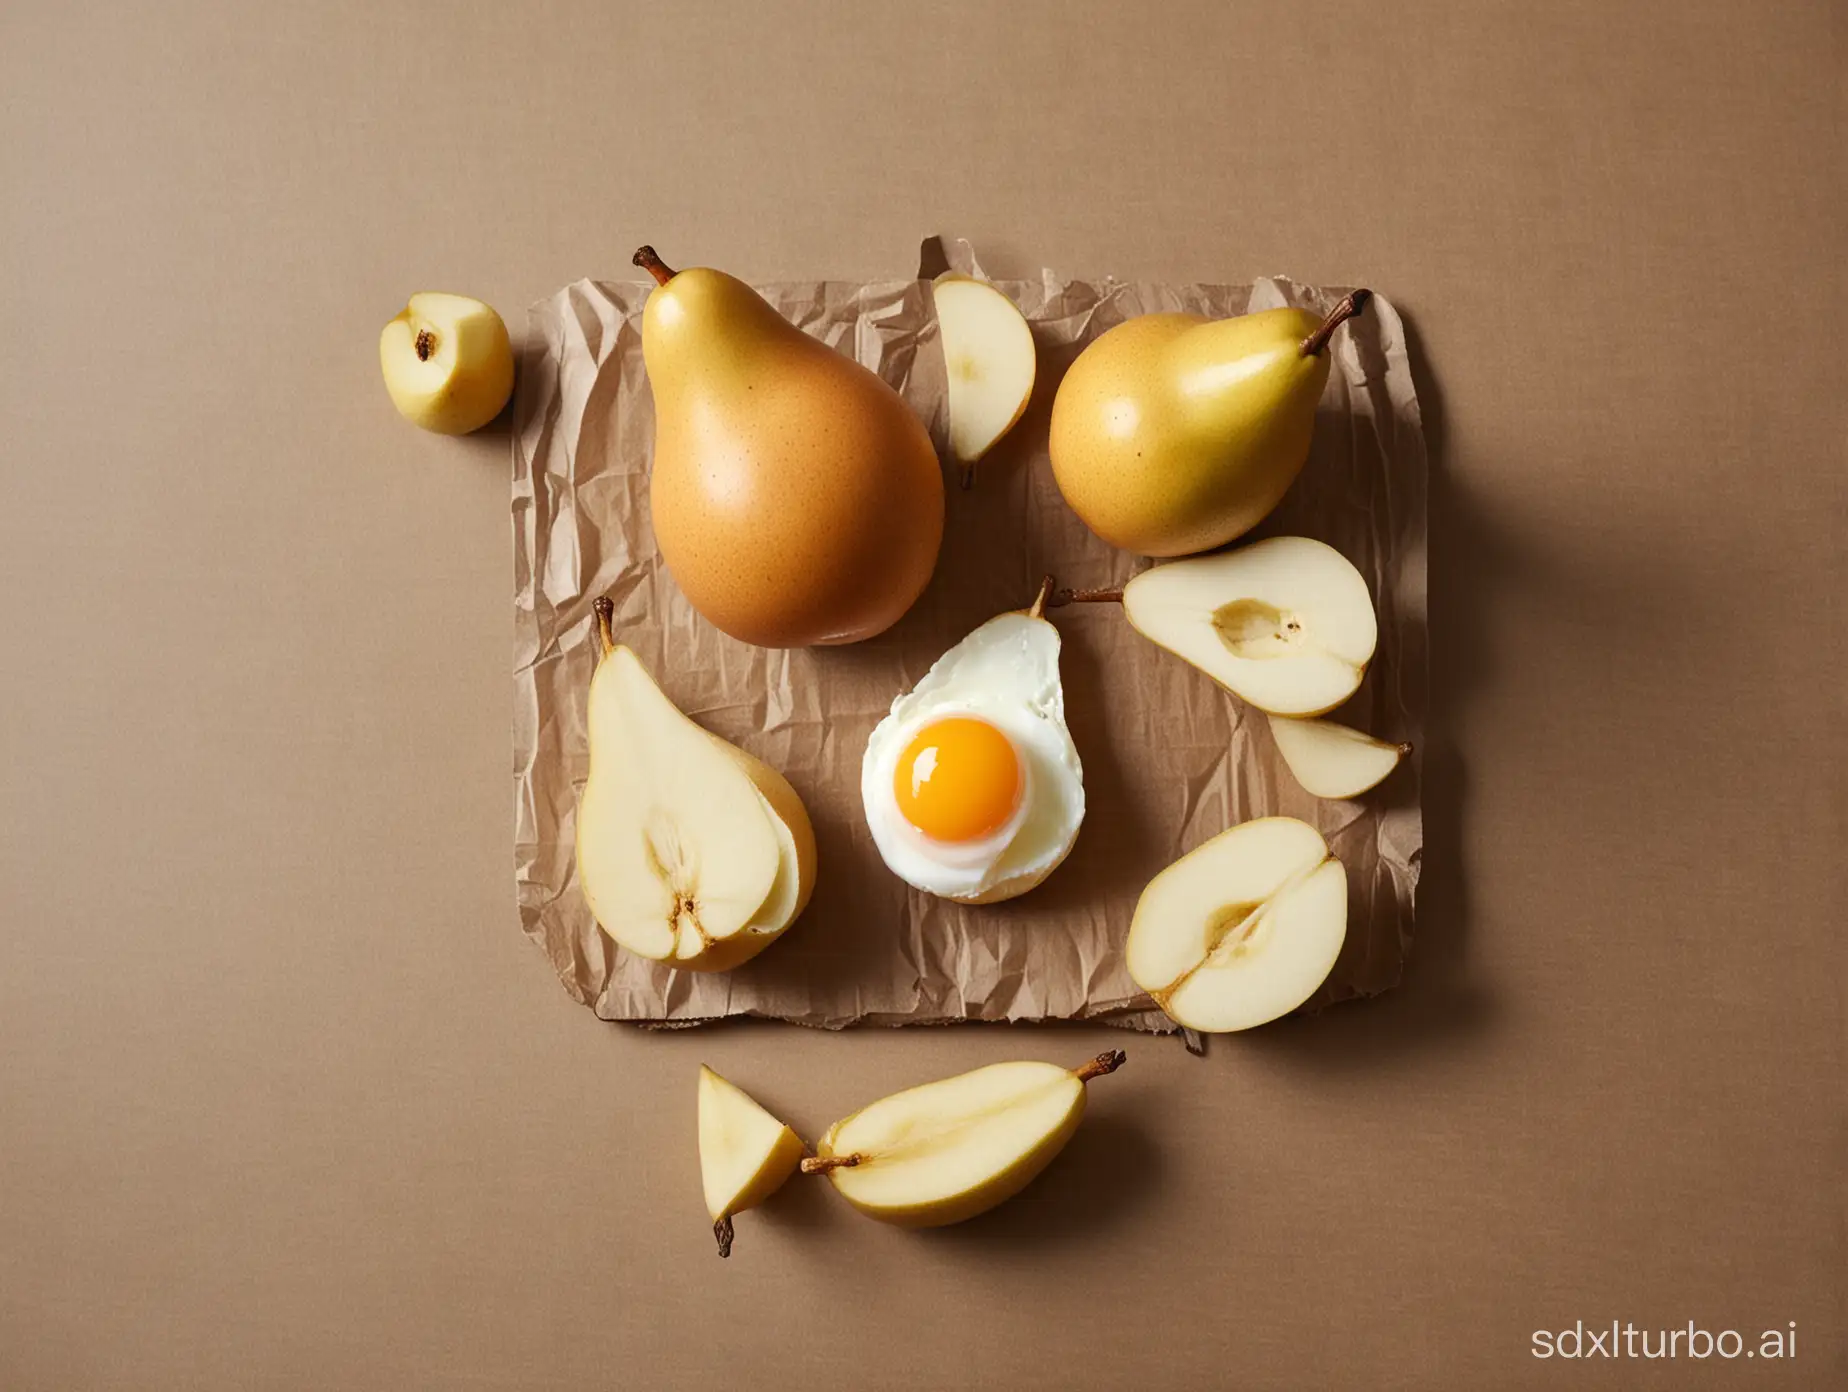 Artistic-Composition-of-Eggs-and-Pears-Abstract-Fusion-in-Still-Life